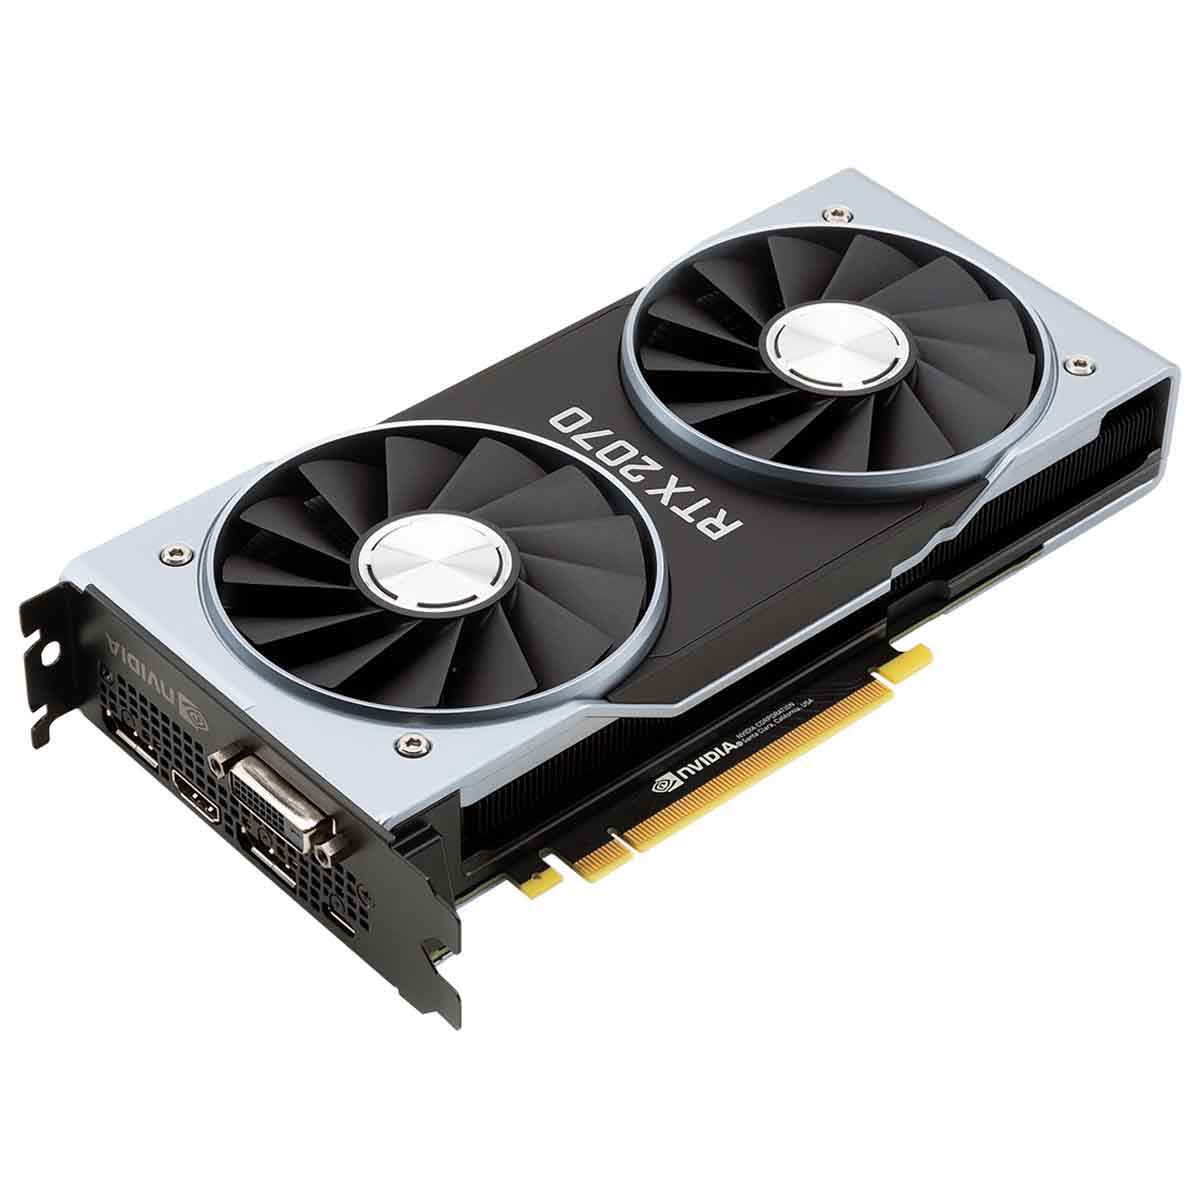 Best Graphics Cards for Laptops in India